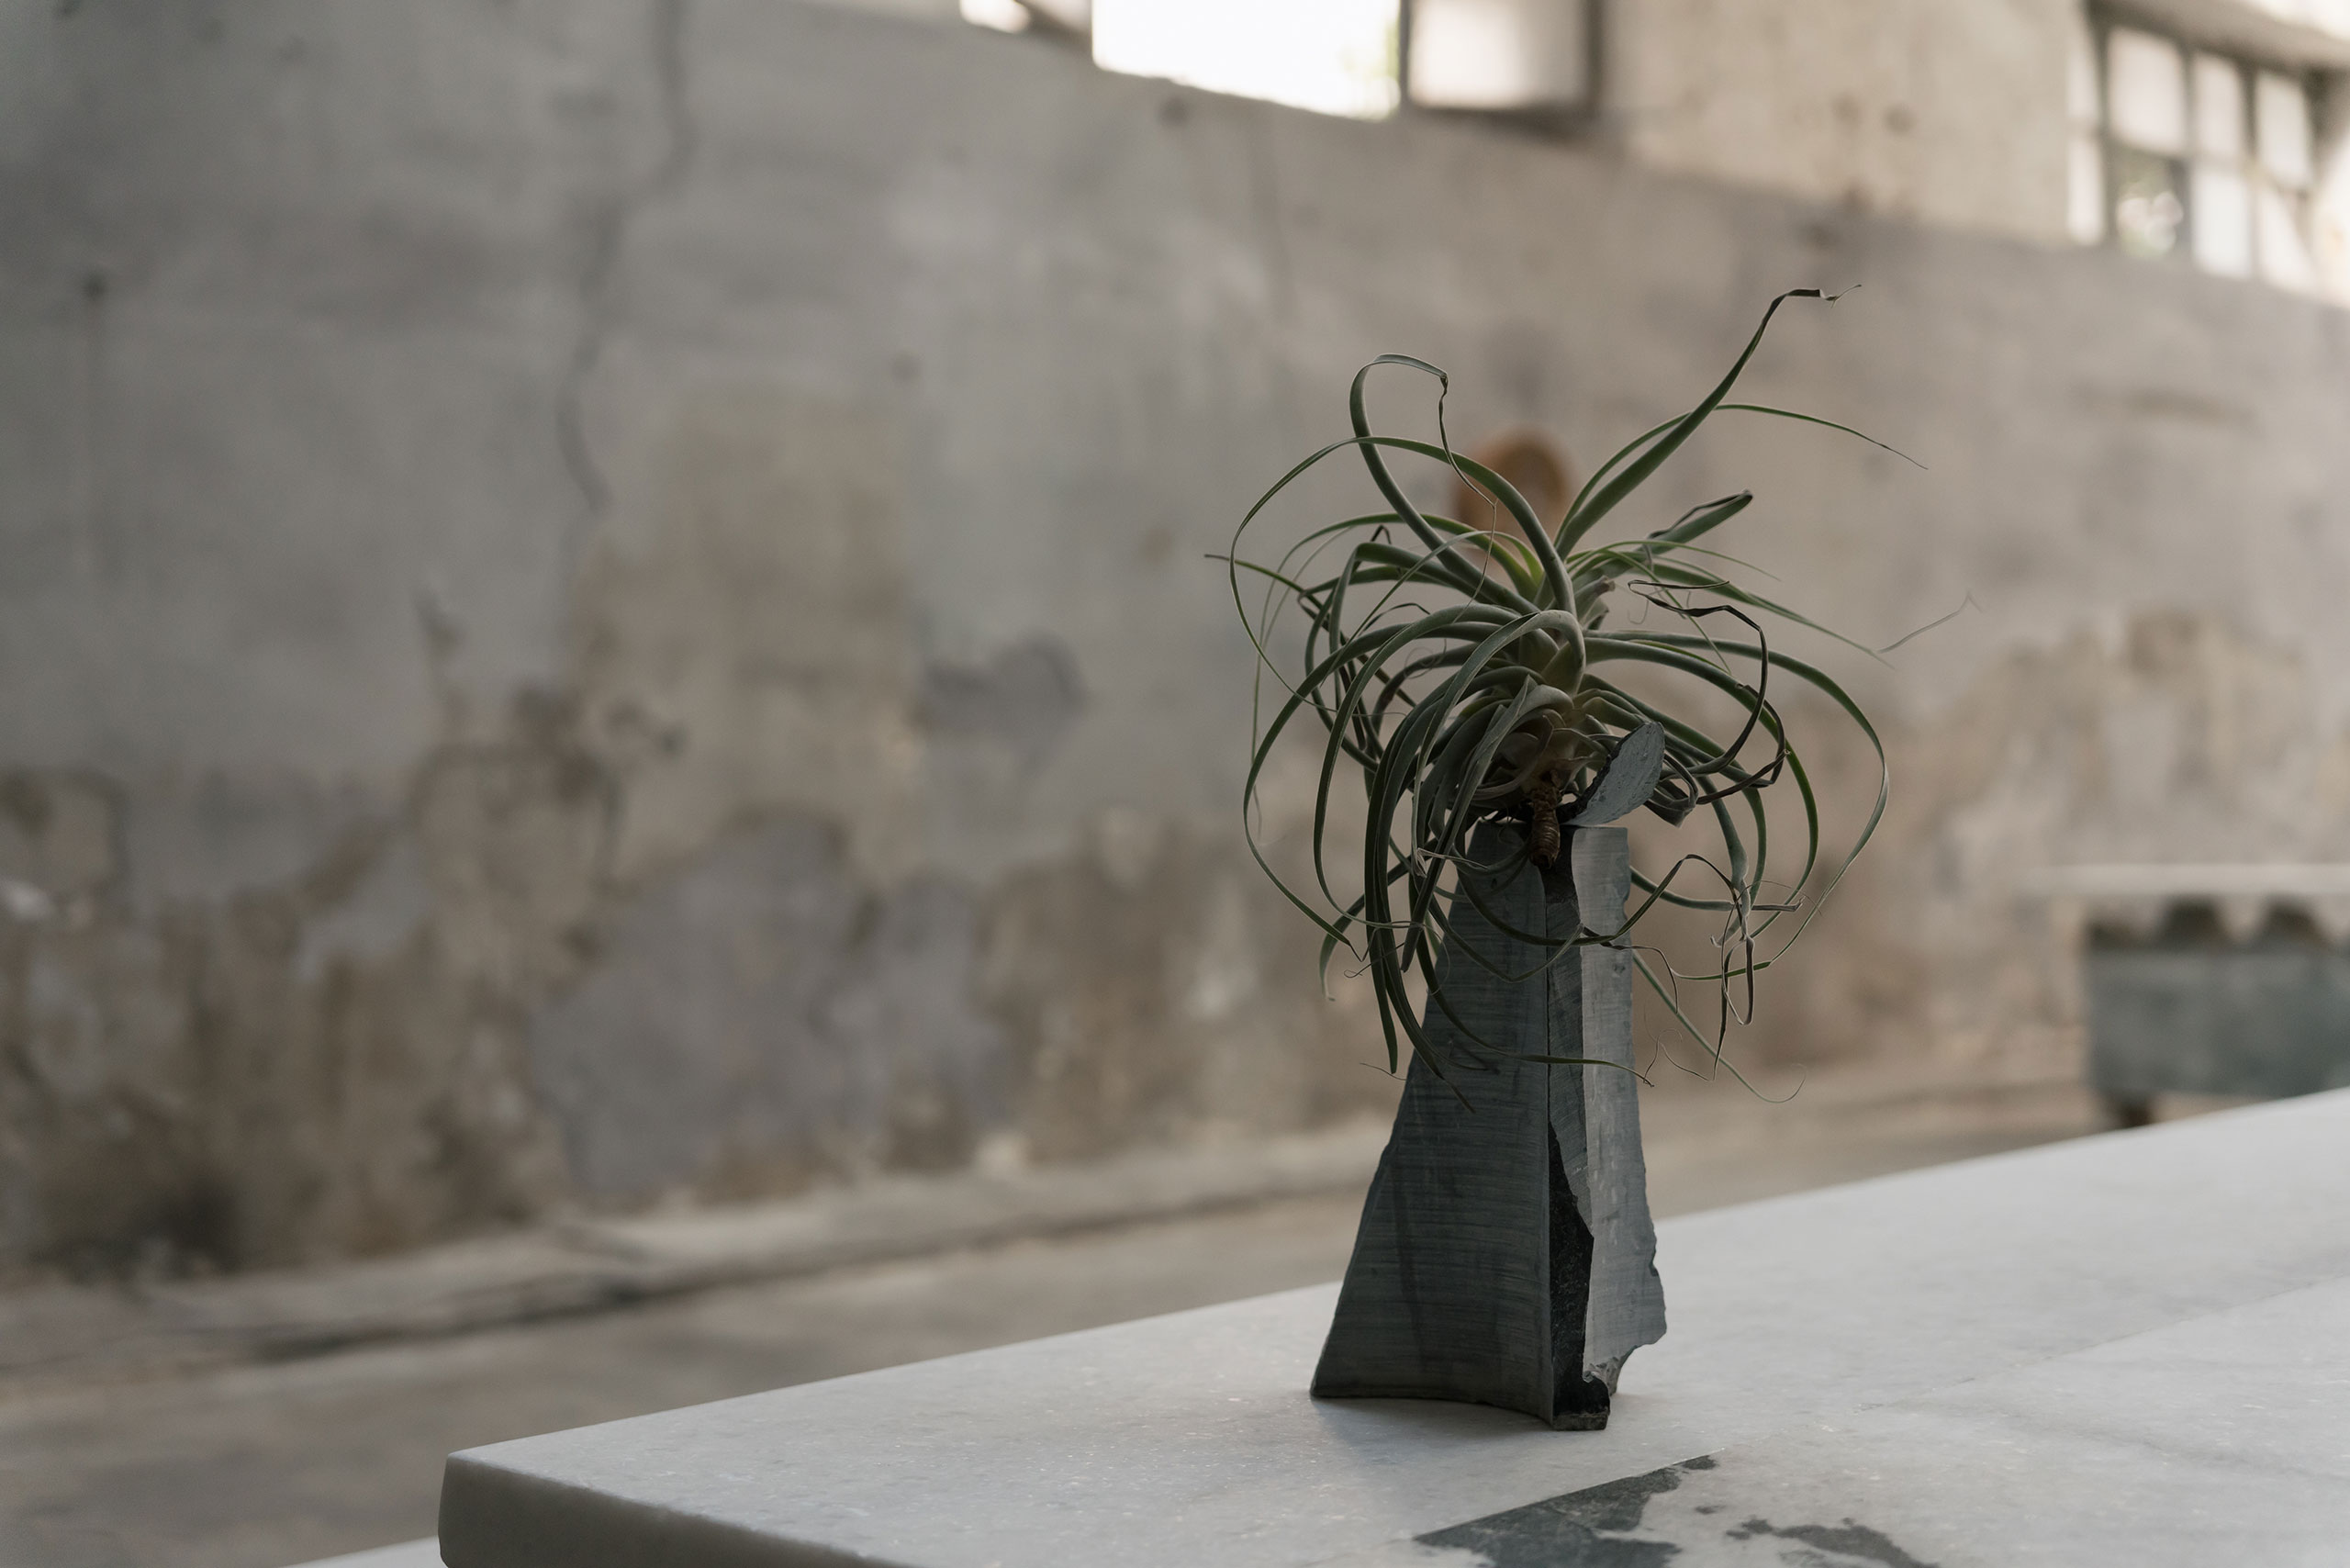 Flower arrangements by Alina Dheere in collaboration with Theodore Psychoyos.
Installation view, Kaminia, Piraeus, Greece, June 2023.
Photography by Bill Stamatopoulos © Yatzerlab.